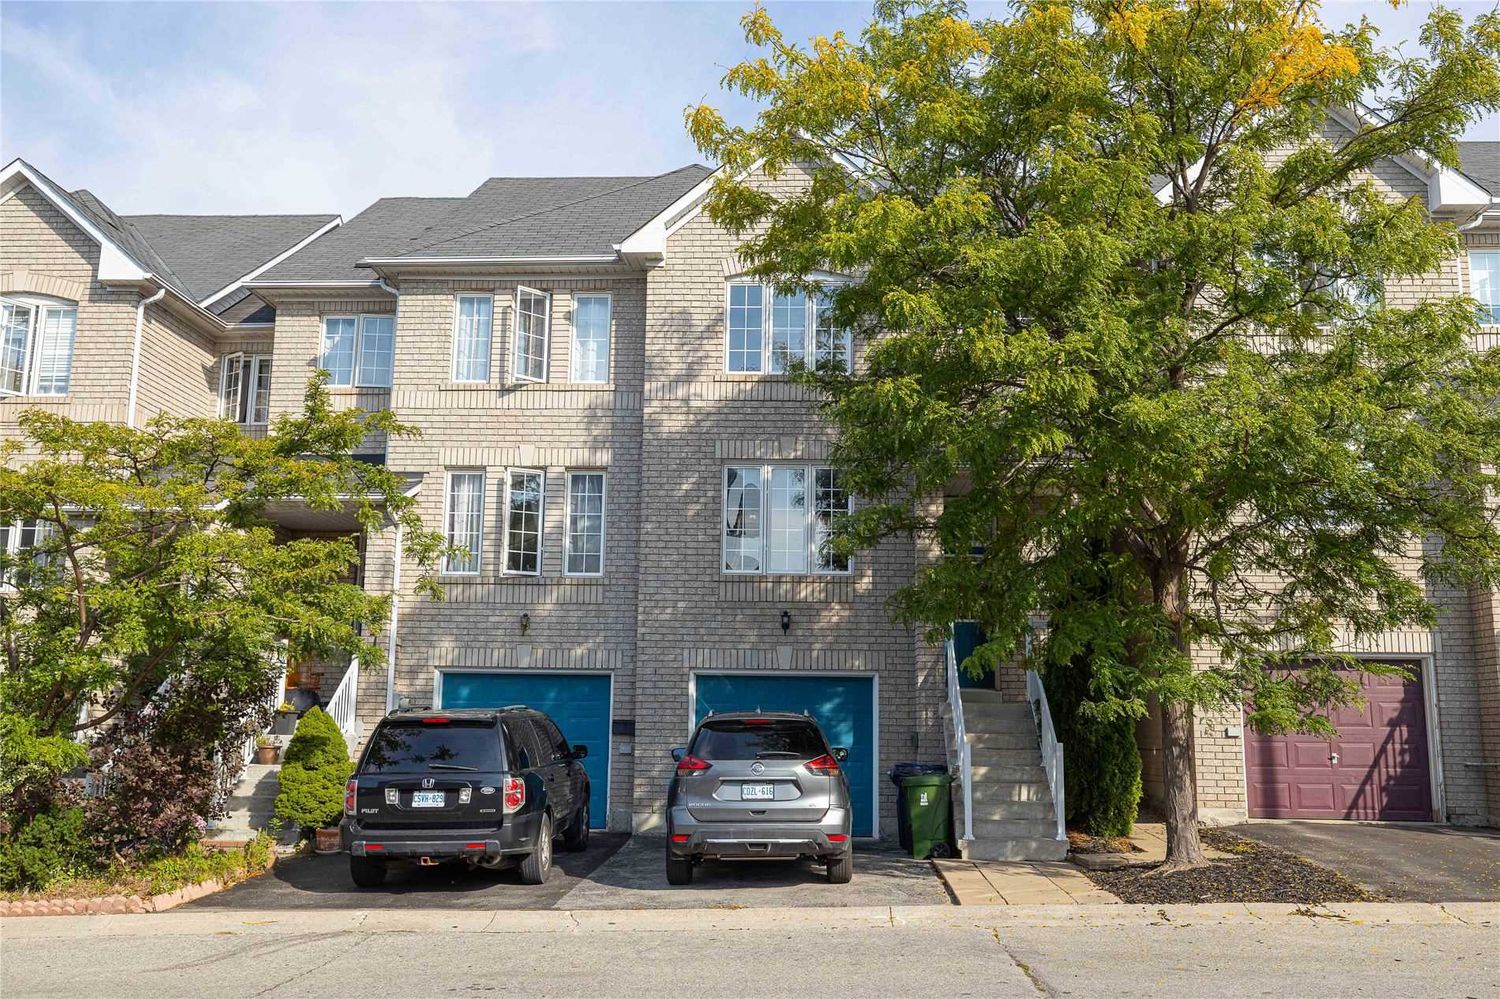 686-716 Warden Avenue. Warden Avenue Townhouses is located in  Scarborough, Toronto - image #2 of 2